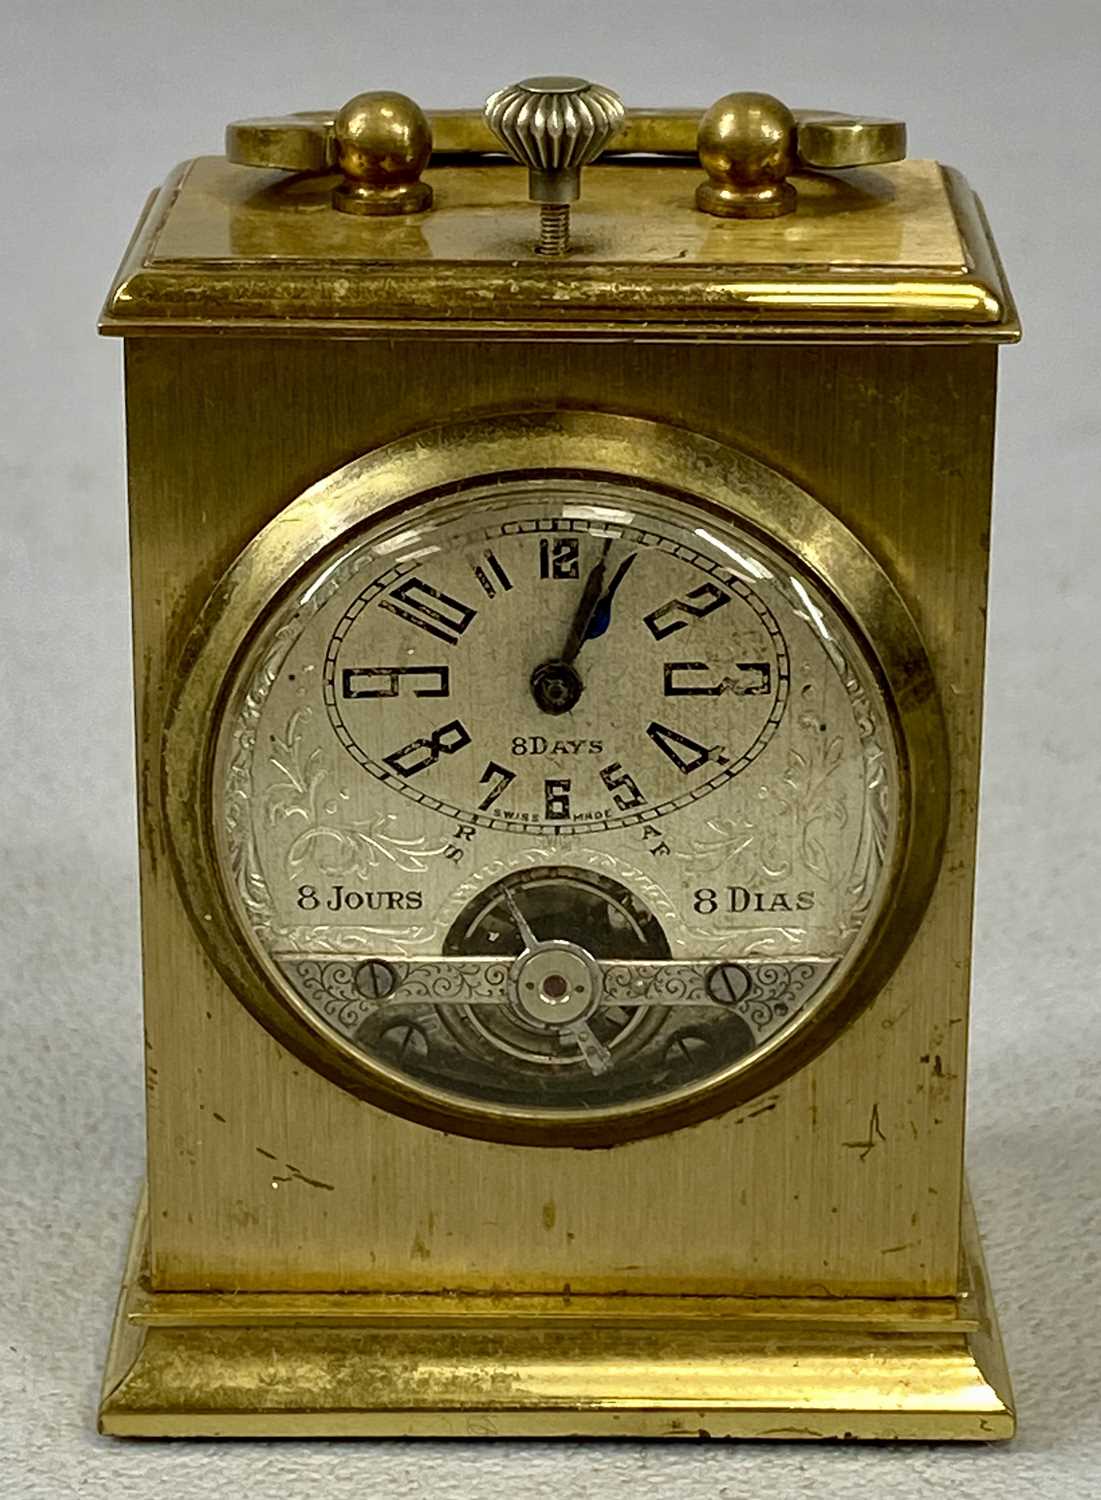 MINIATURE FRENCH GILDED BRASS CARRIAGE CLOCK, early 20th century, three quarter silvered dial with